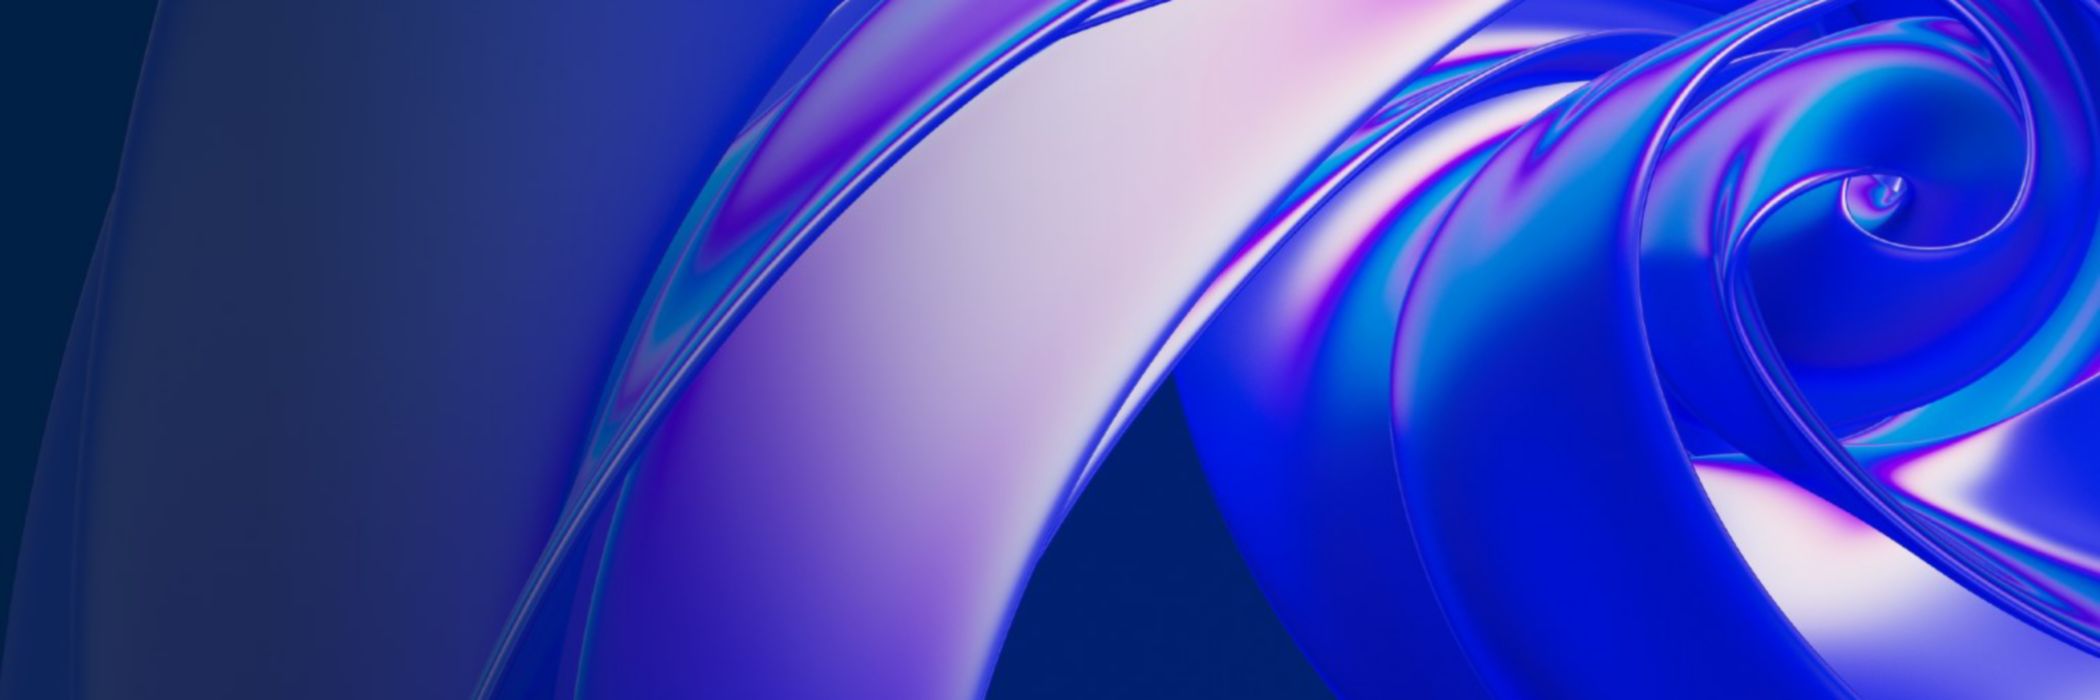 blue-and-purple-lines-over-blue-background